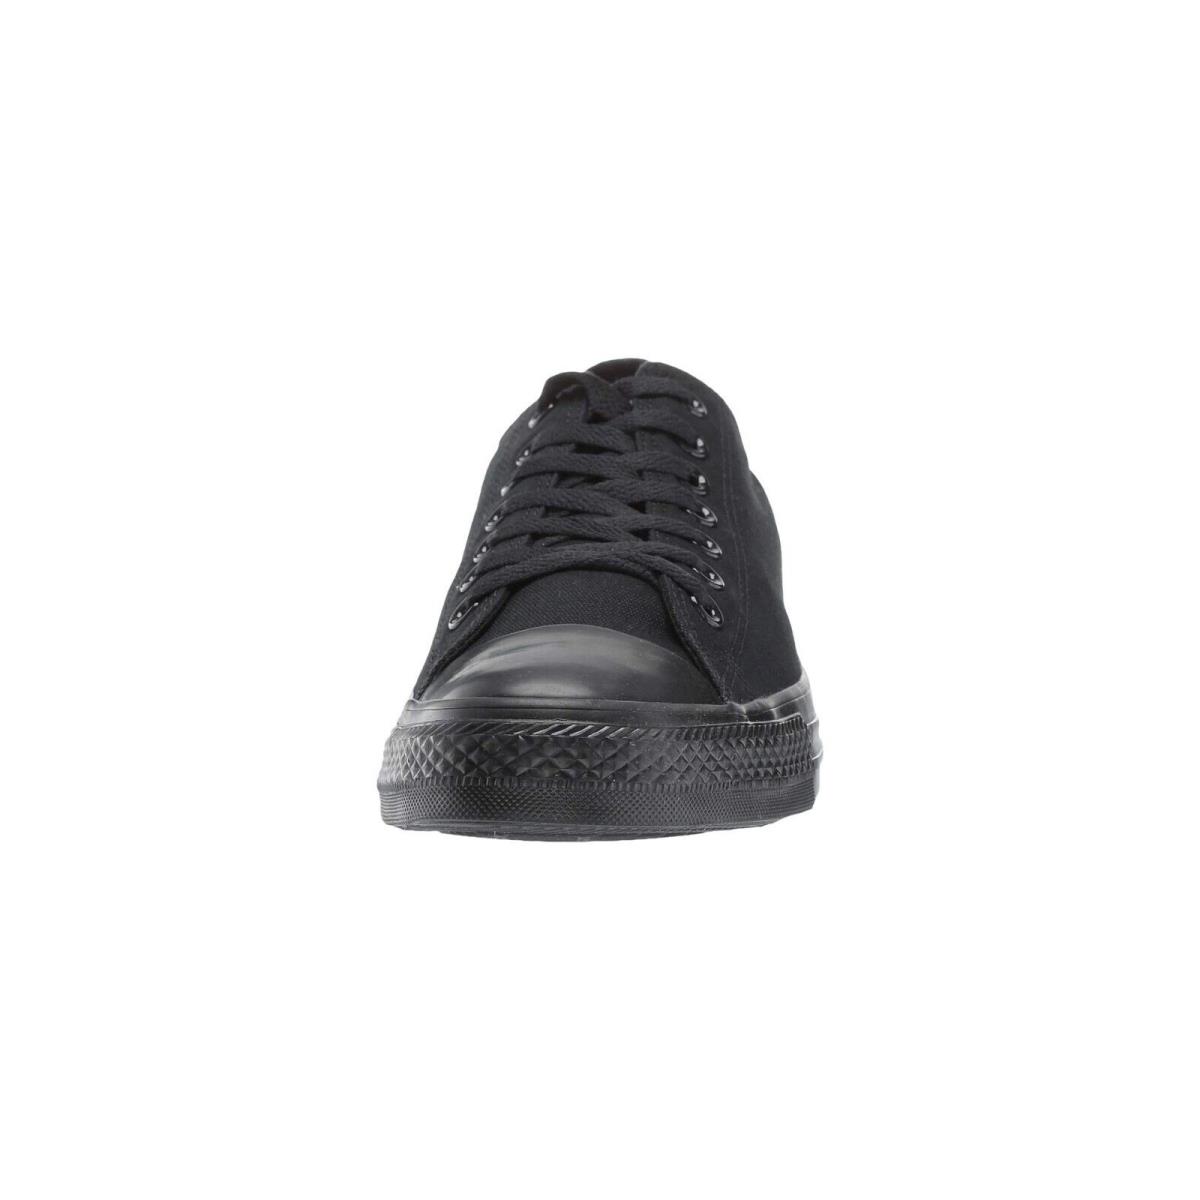 Converse Chuck Taylor All Star Low Top Unisex Canvas Shoes Sneaker Black Mono